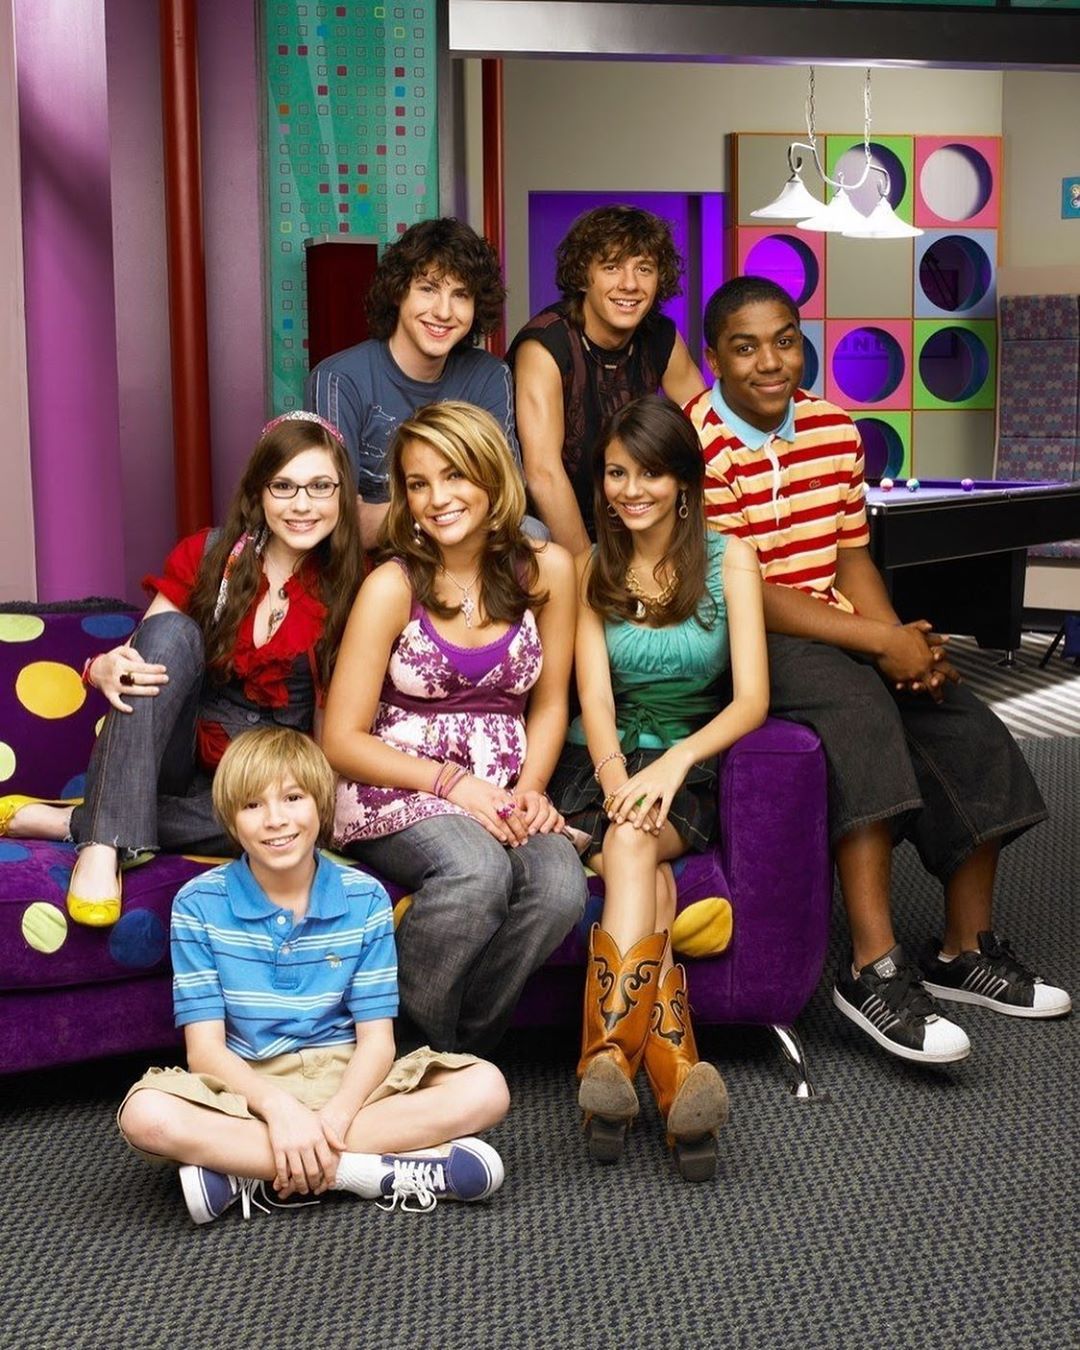 Everything We Know About "Zoey 101" Reboot